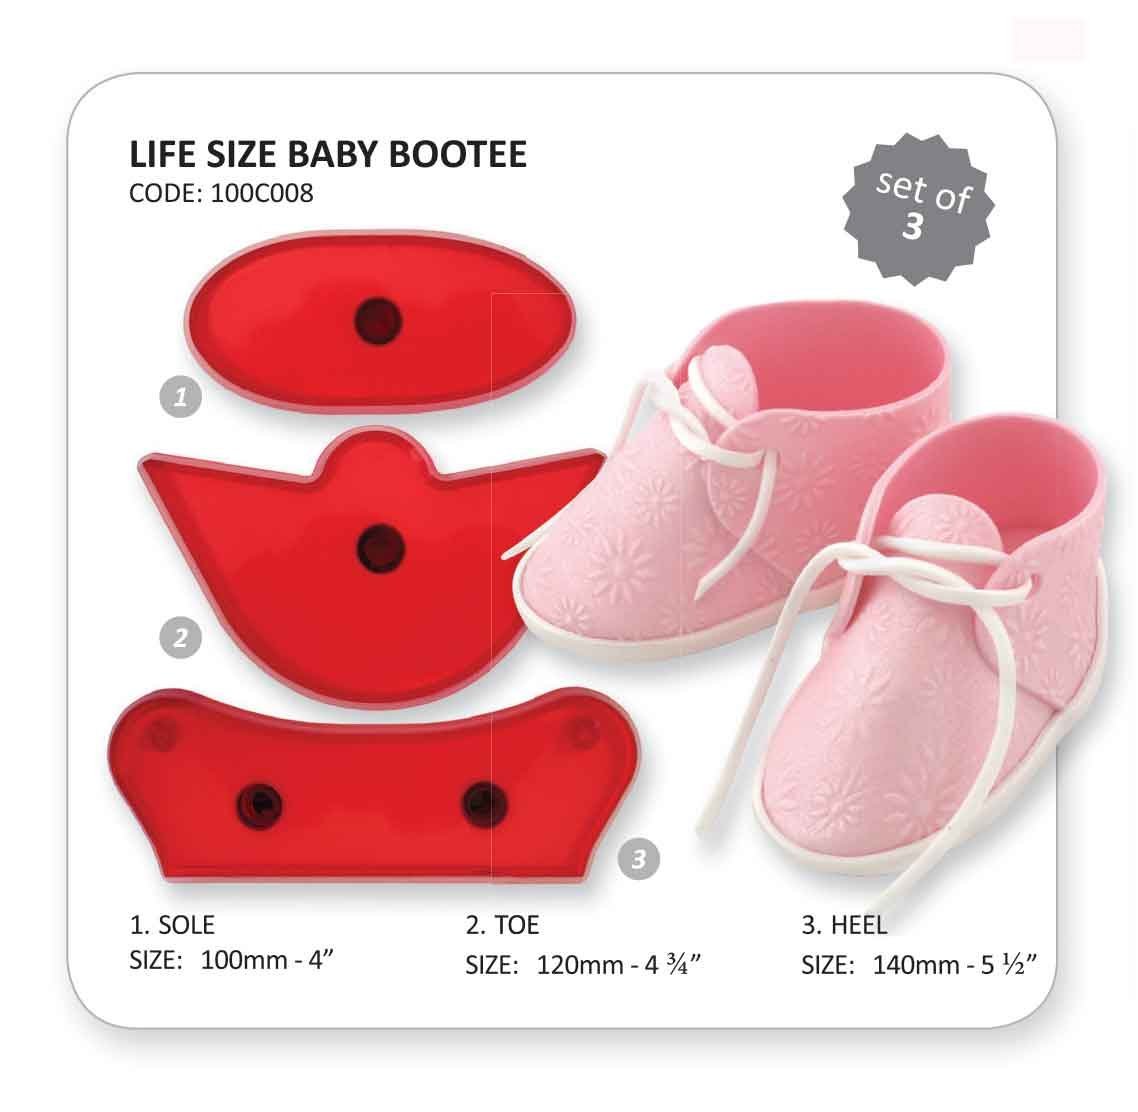 2001420 Jem Life Size Baby Bootie Set of 3